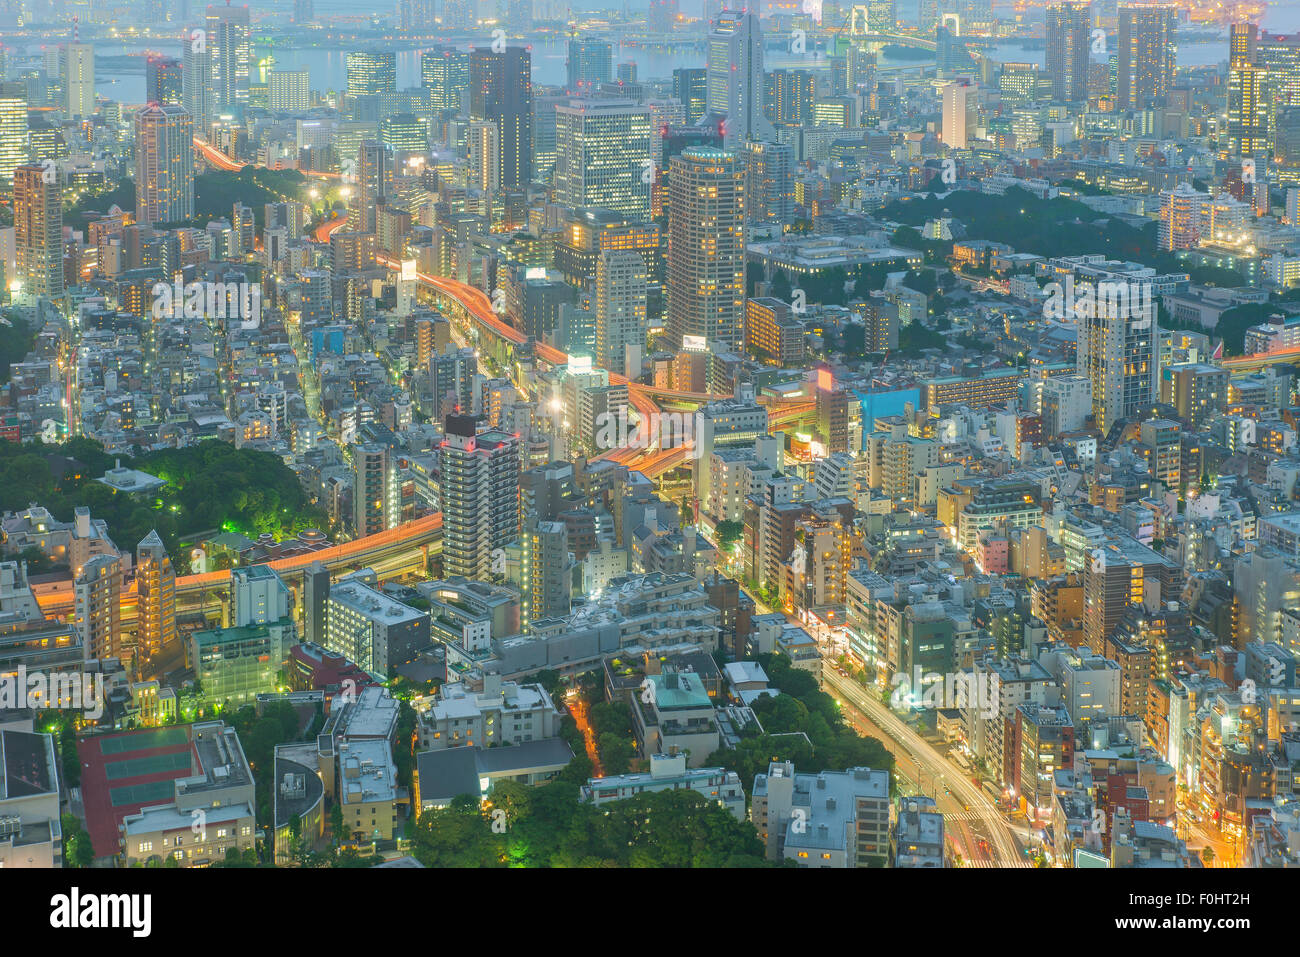 Tokyo, Japan cityscape and highways Stock Photo